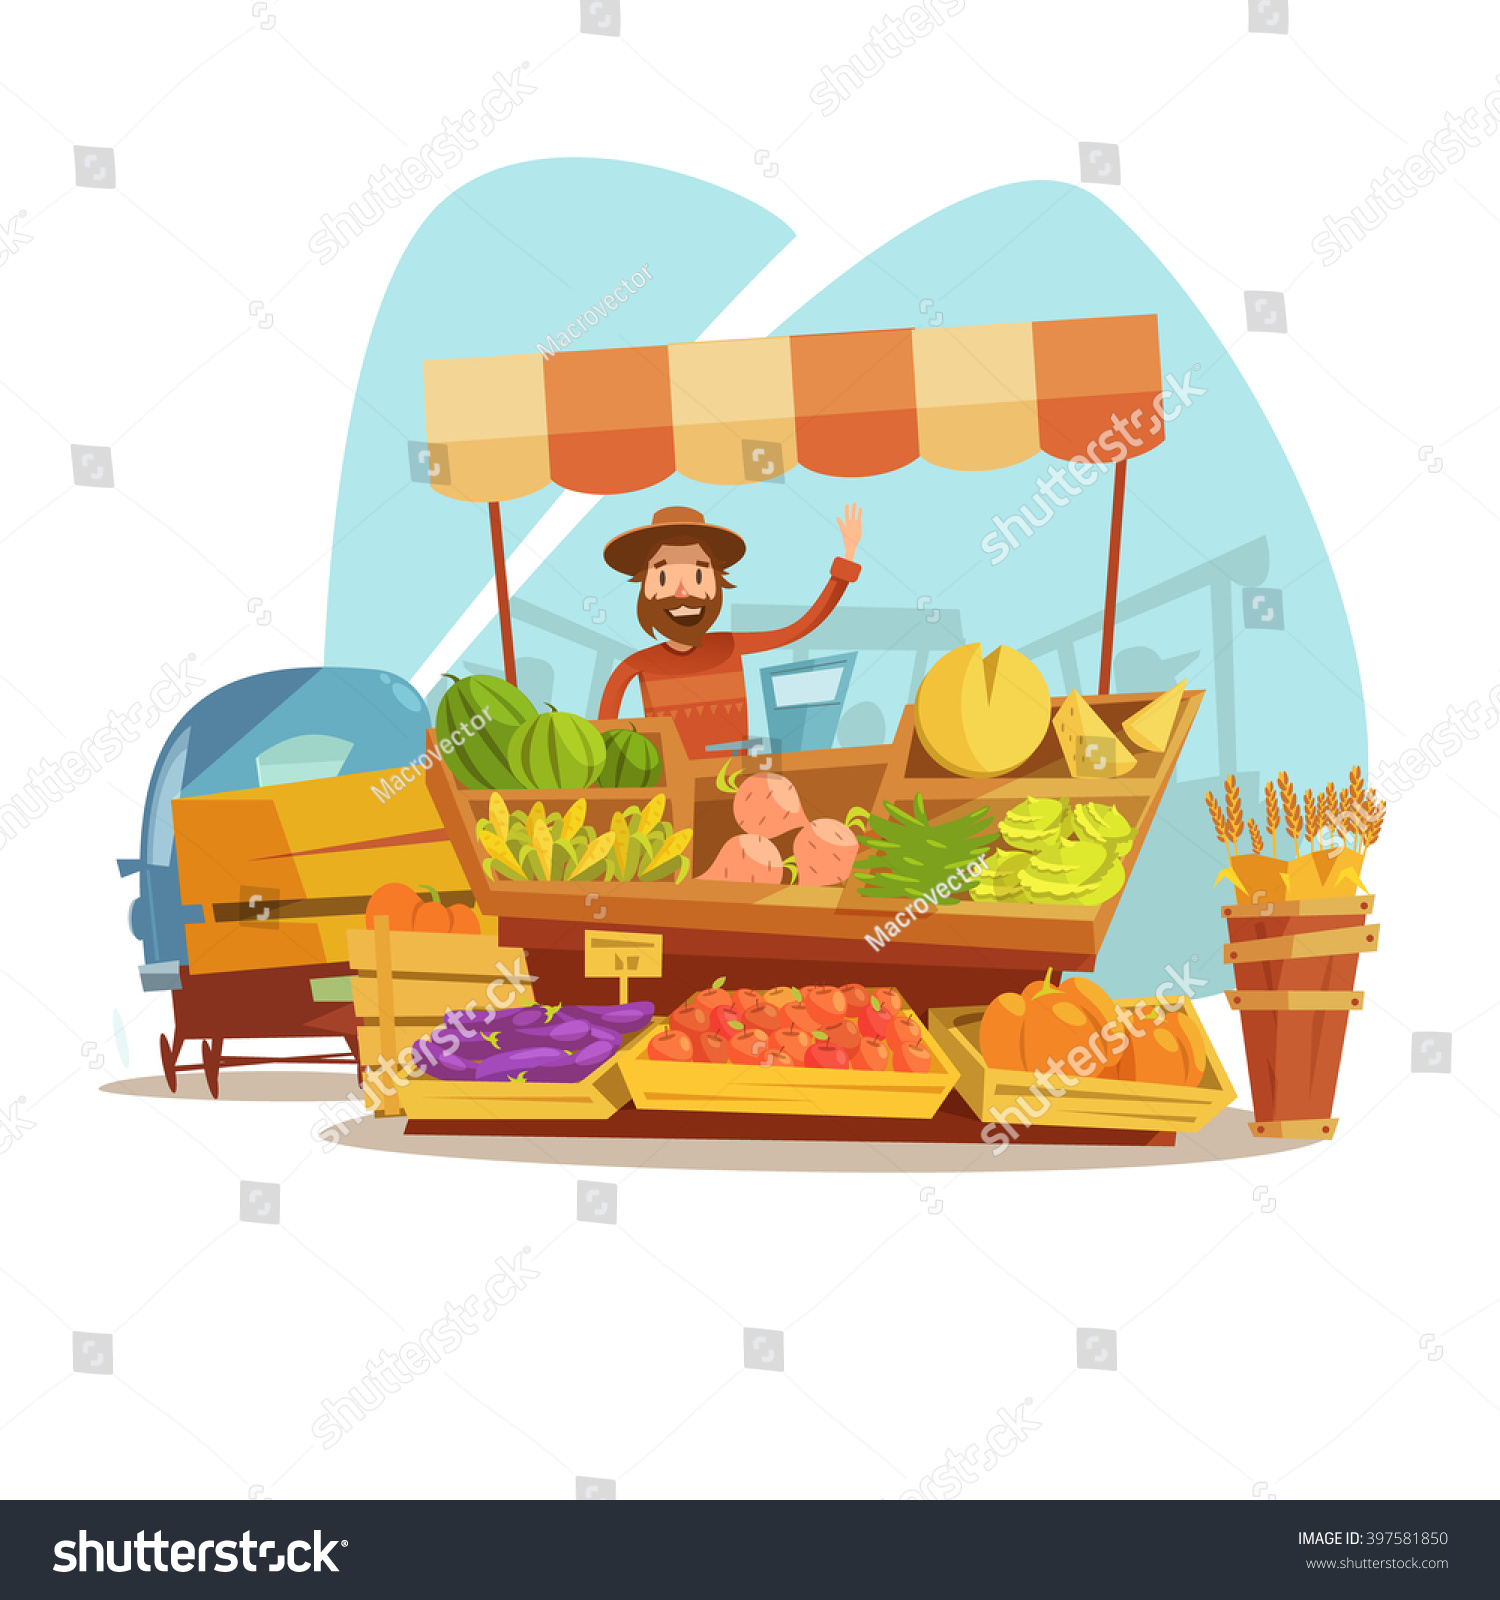 greengrocer clipart - photo #21